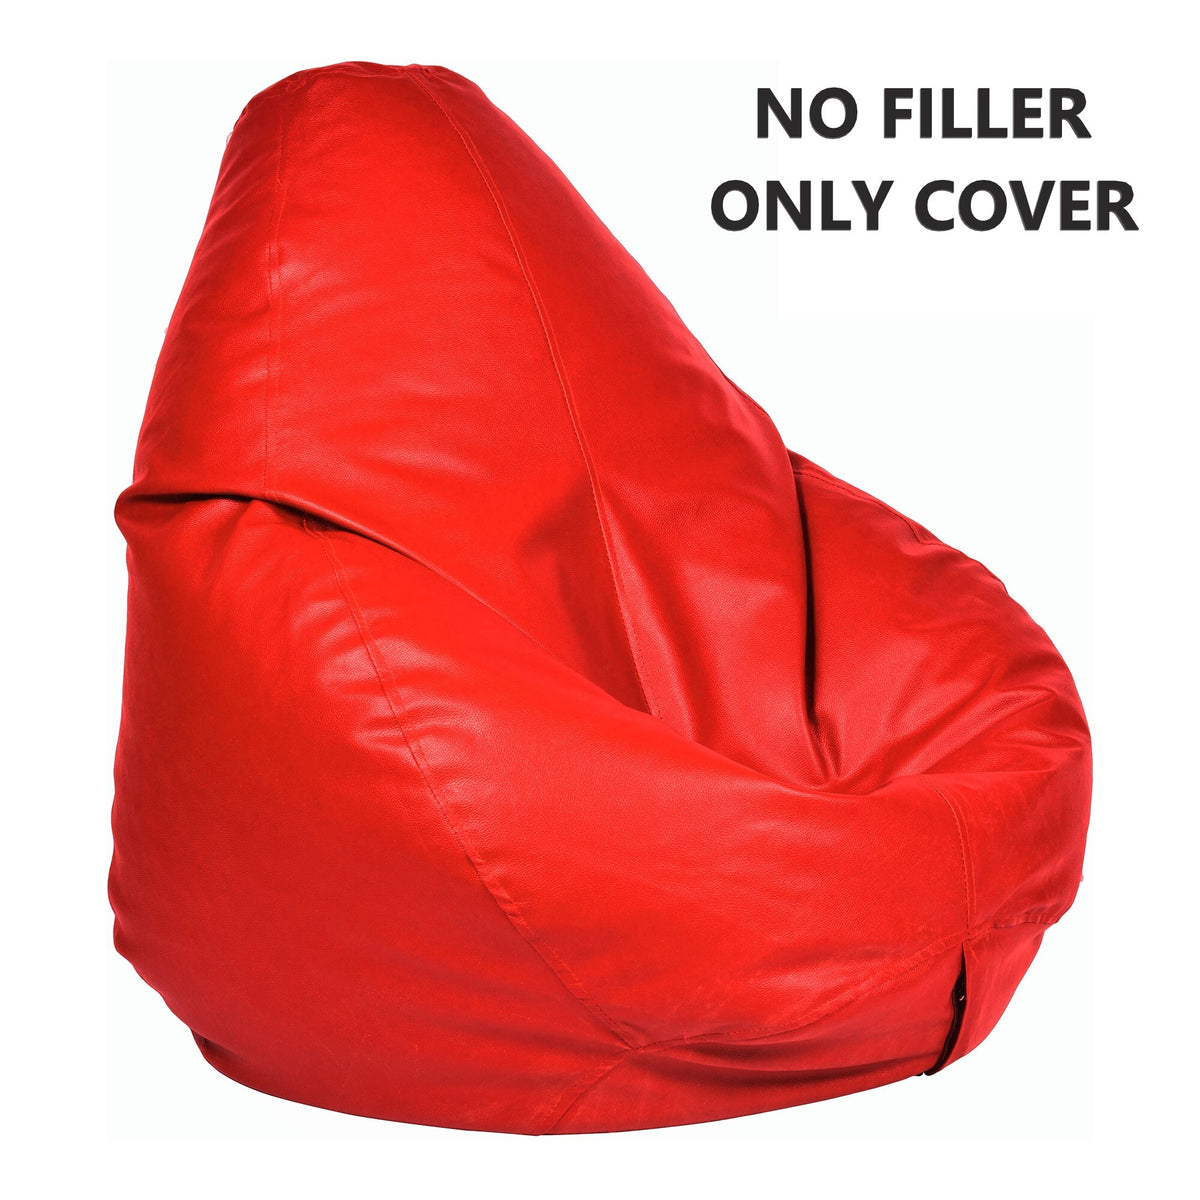 Leatherette Bean Bag Cover- Solid color